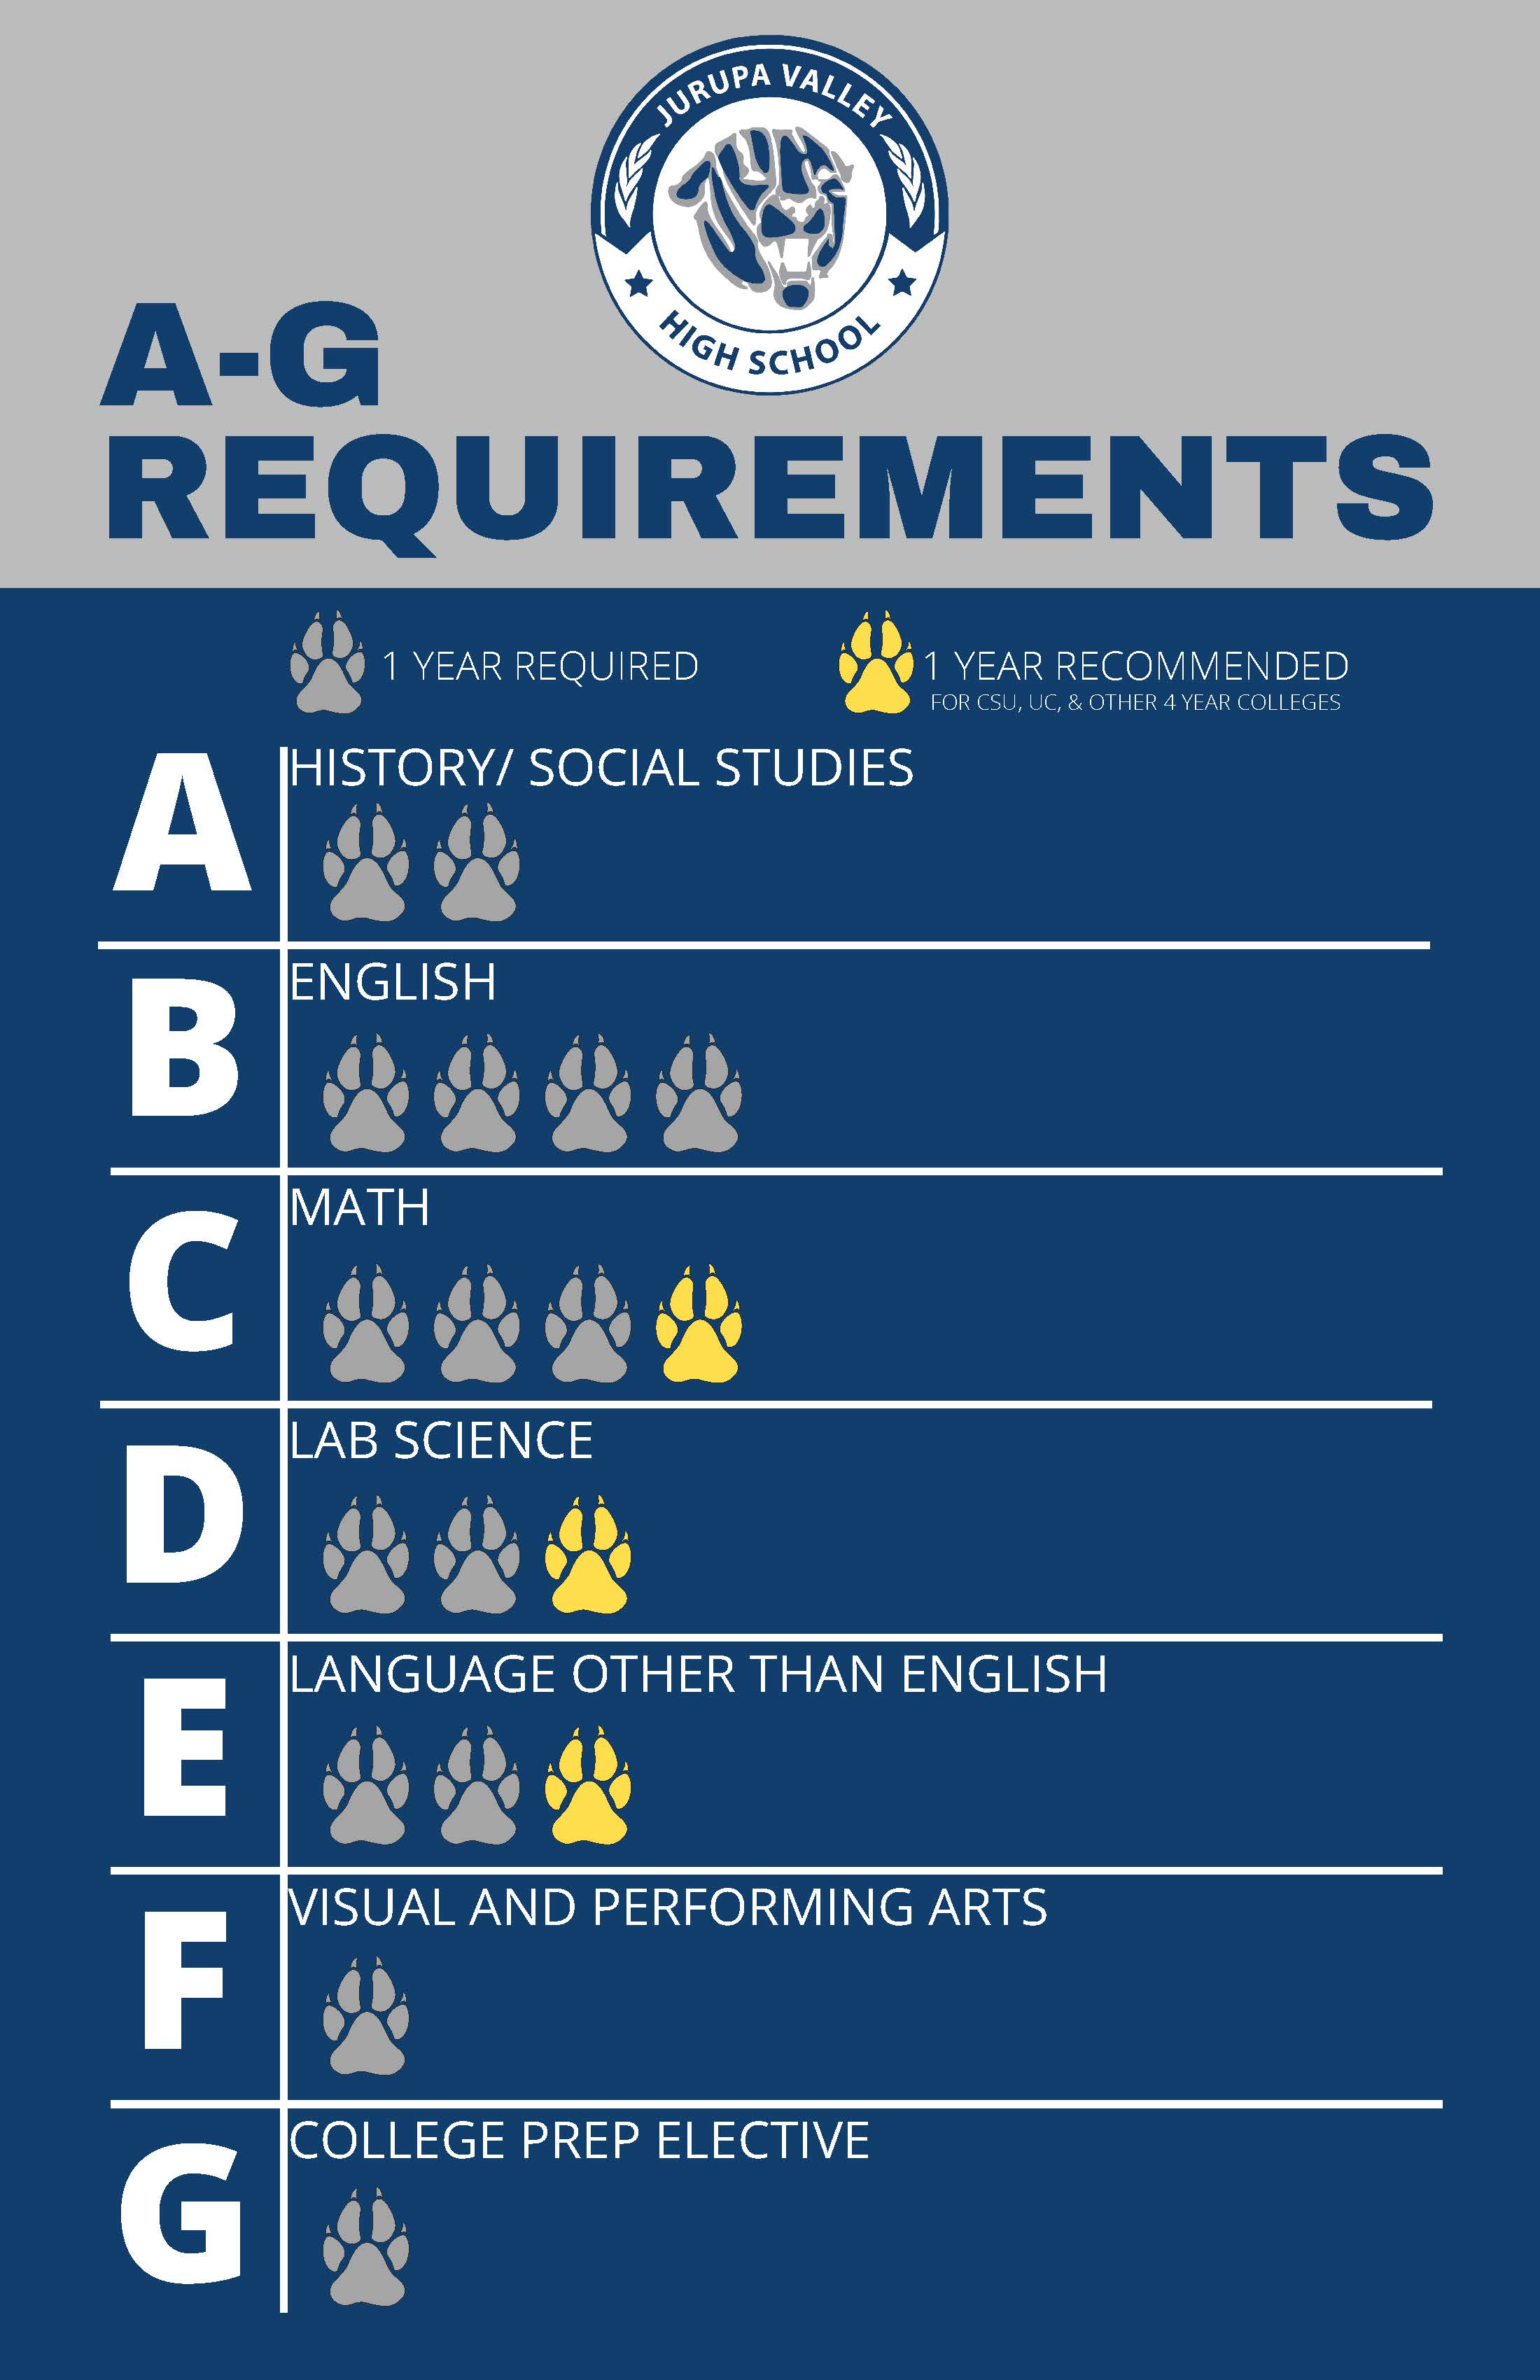 A-G REQUIREMENTS 11x17.jpg